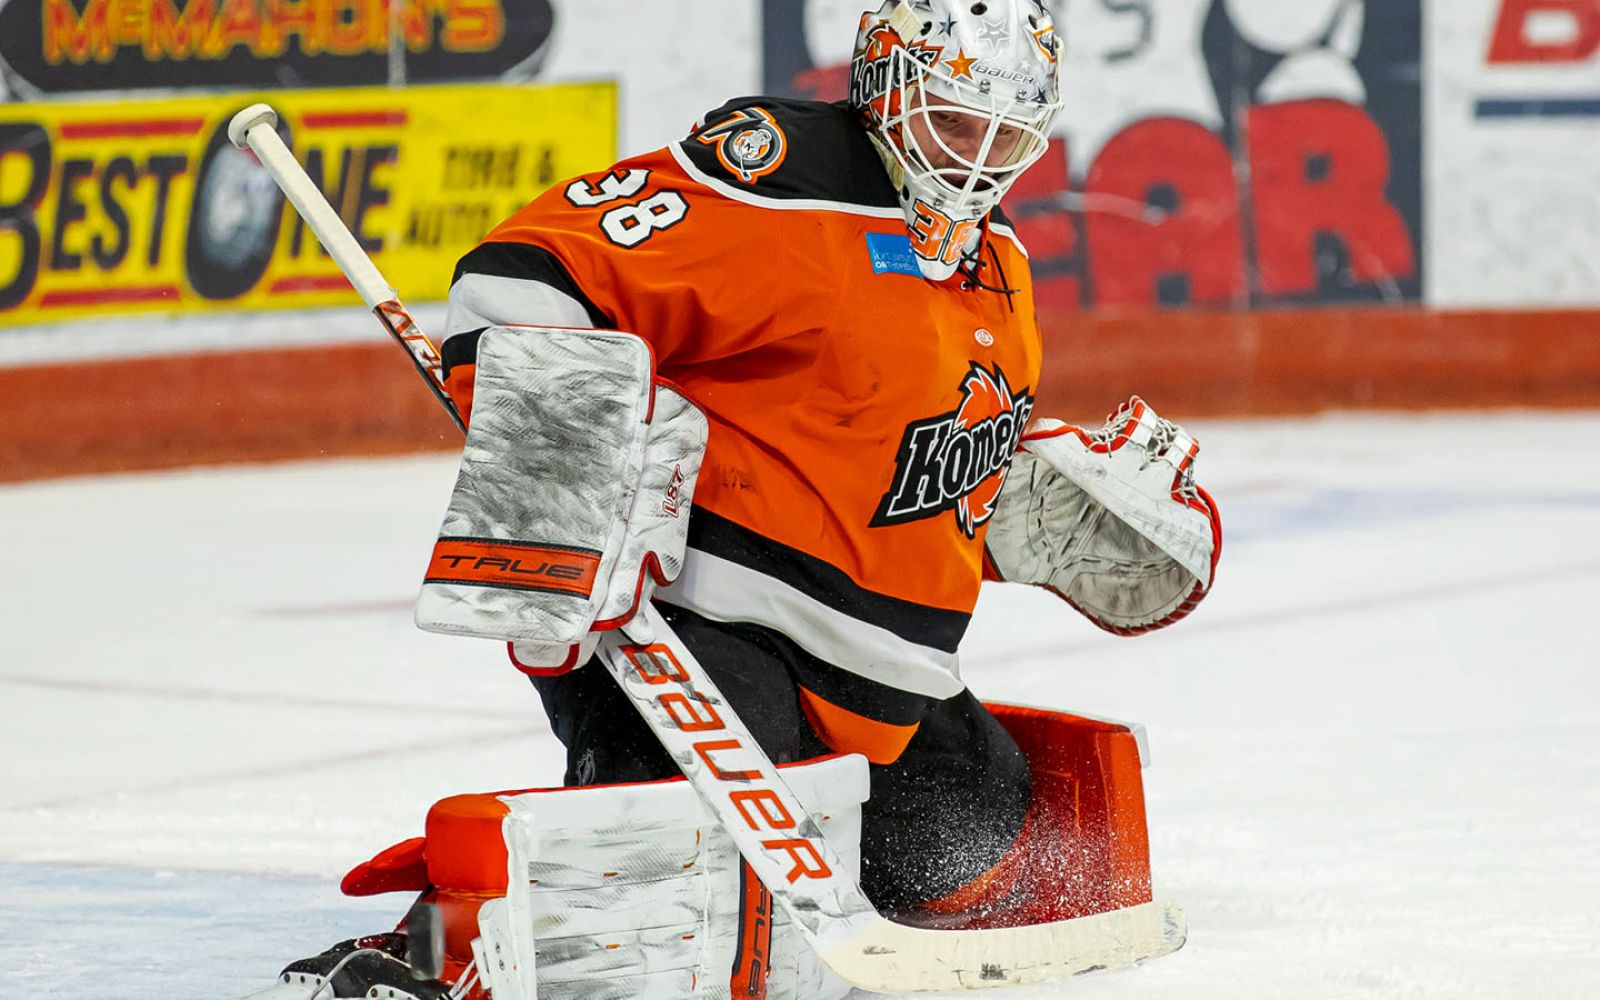 The Komets face Toledo in their annual New Year's Eve game.